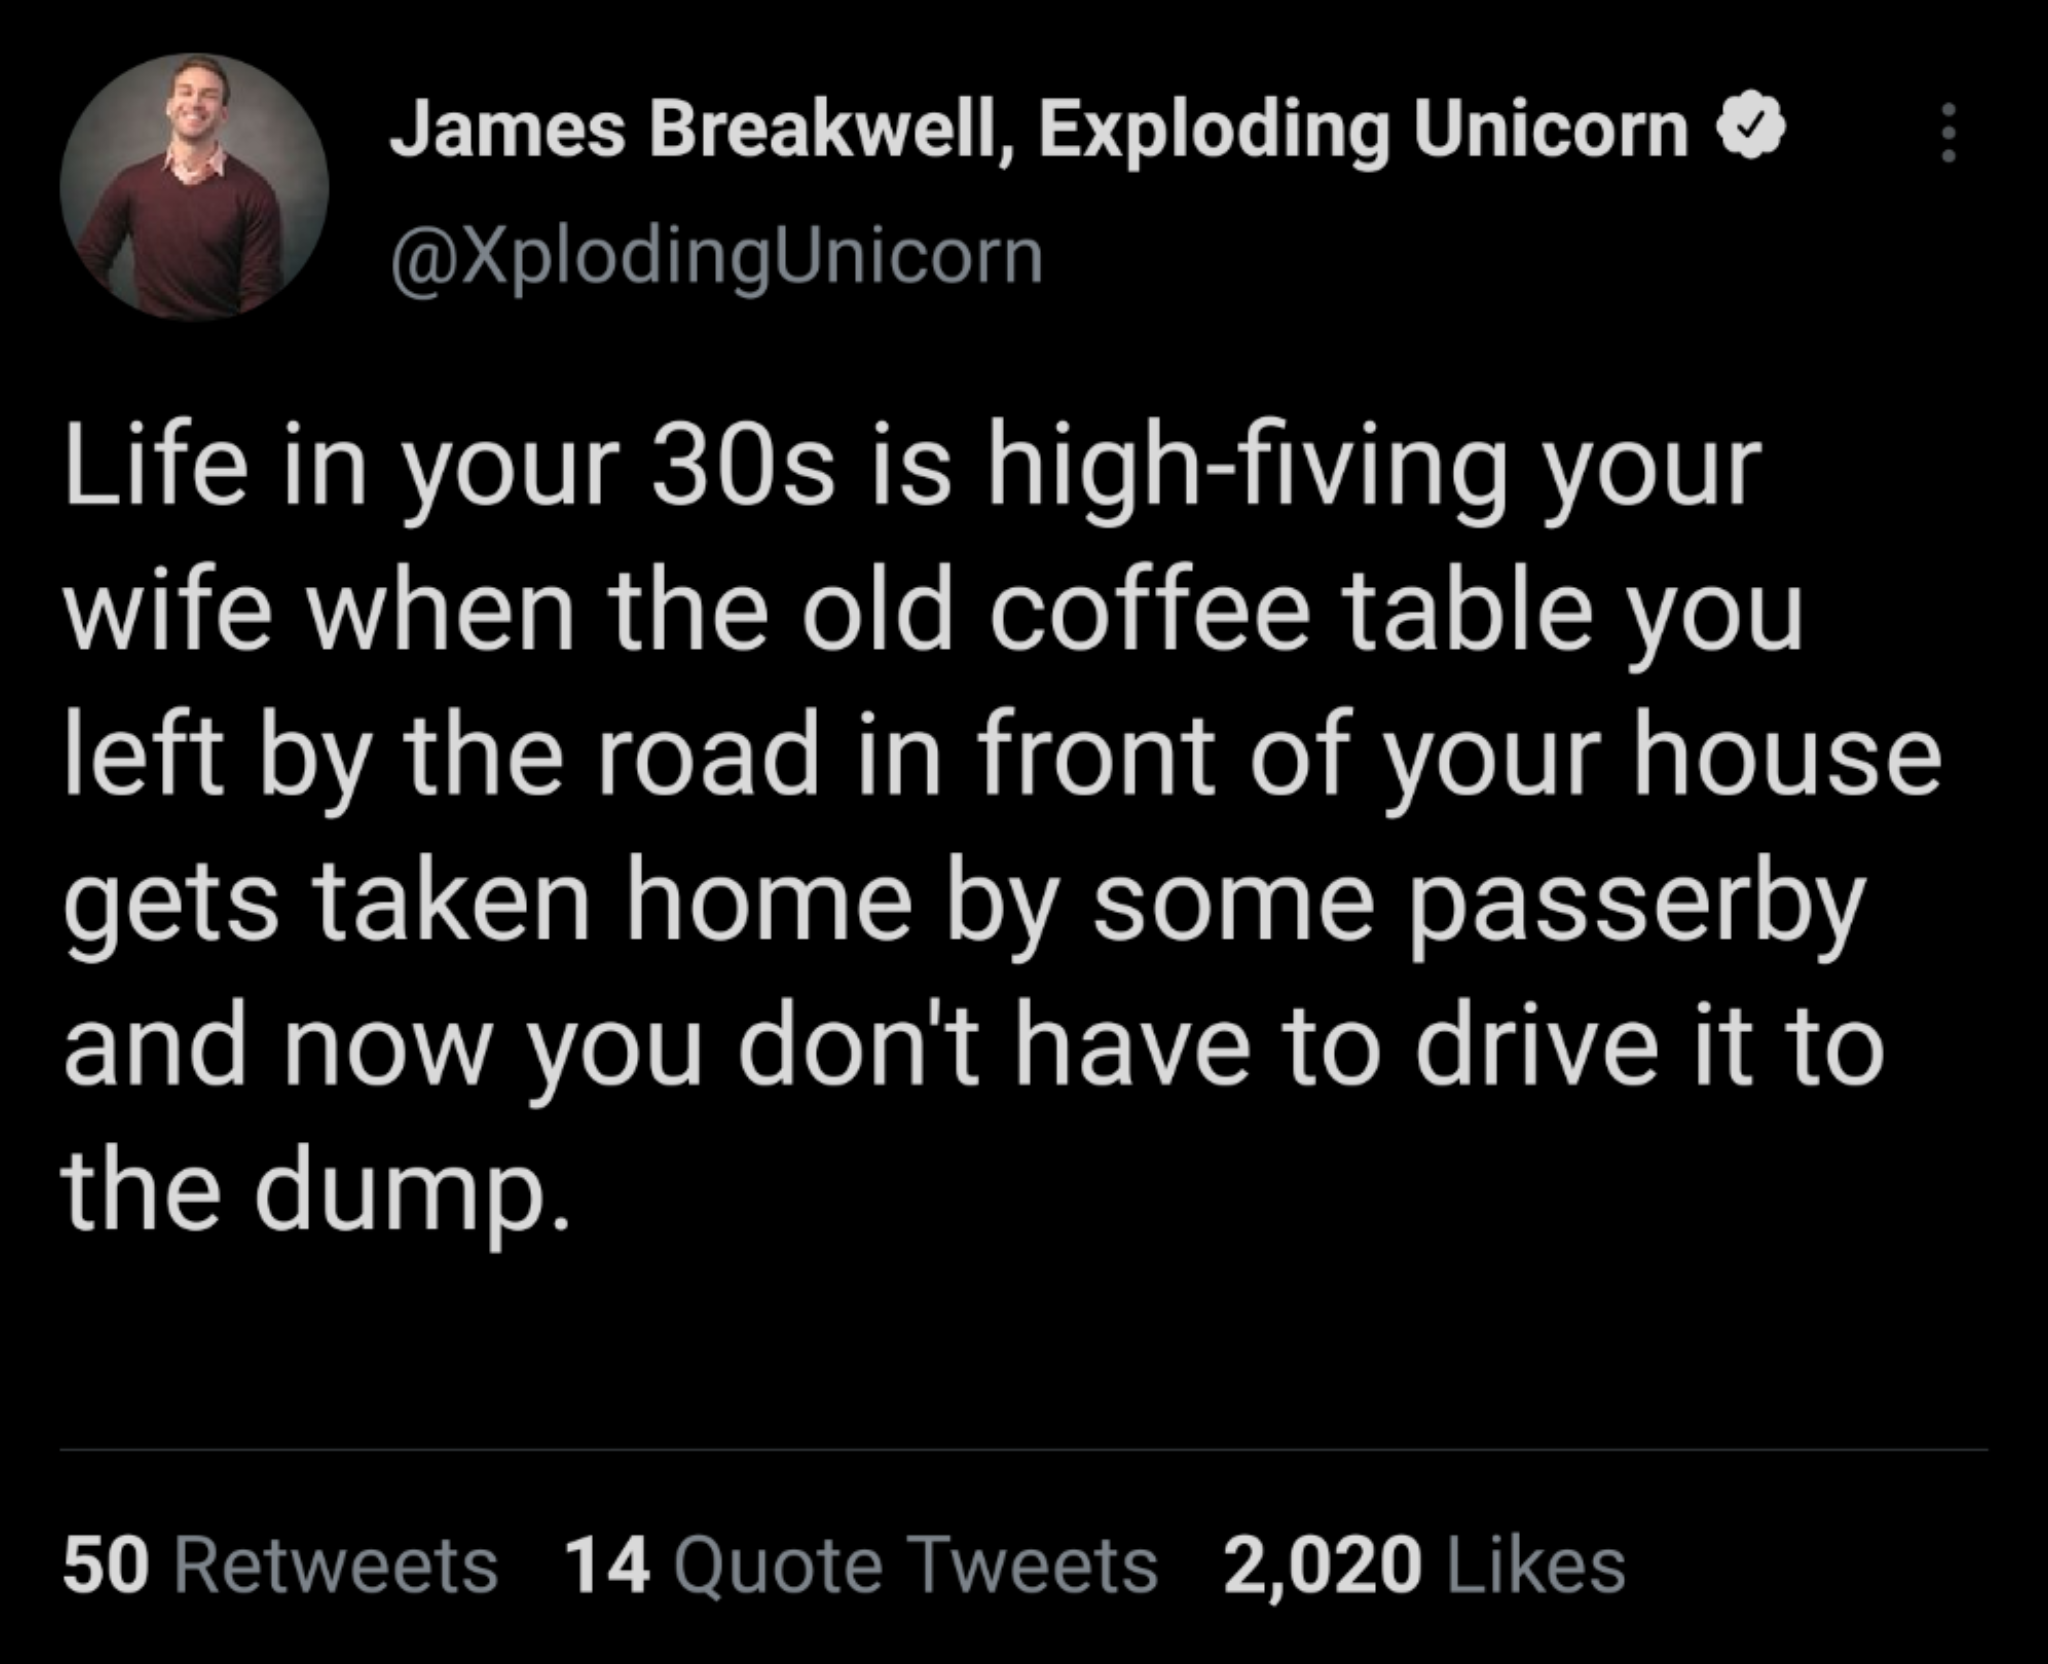 quotes - James Breakwell, Exploding Unicorn Life in your 30s is highfiving your wife when the old coffee table you left by the road in front of your house gets taken home by some passerby and now you don't have to drive it to the dump. 50 14 Quote Tweets 